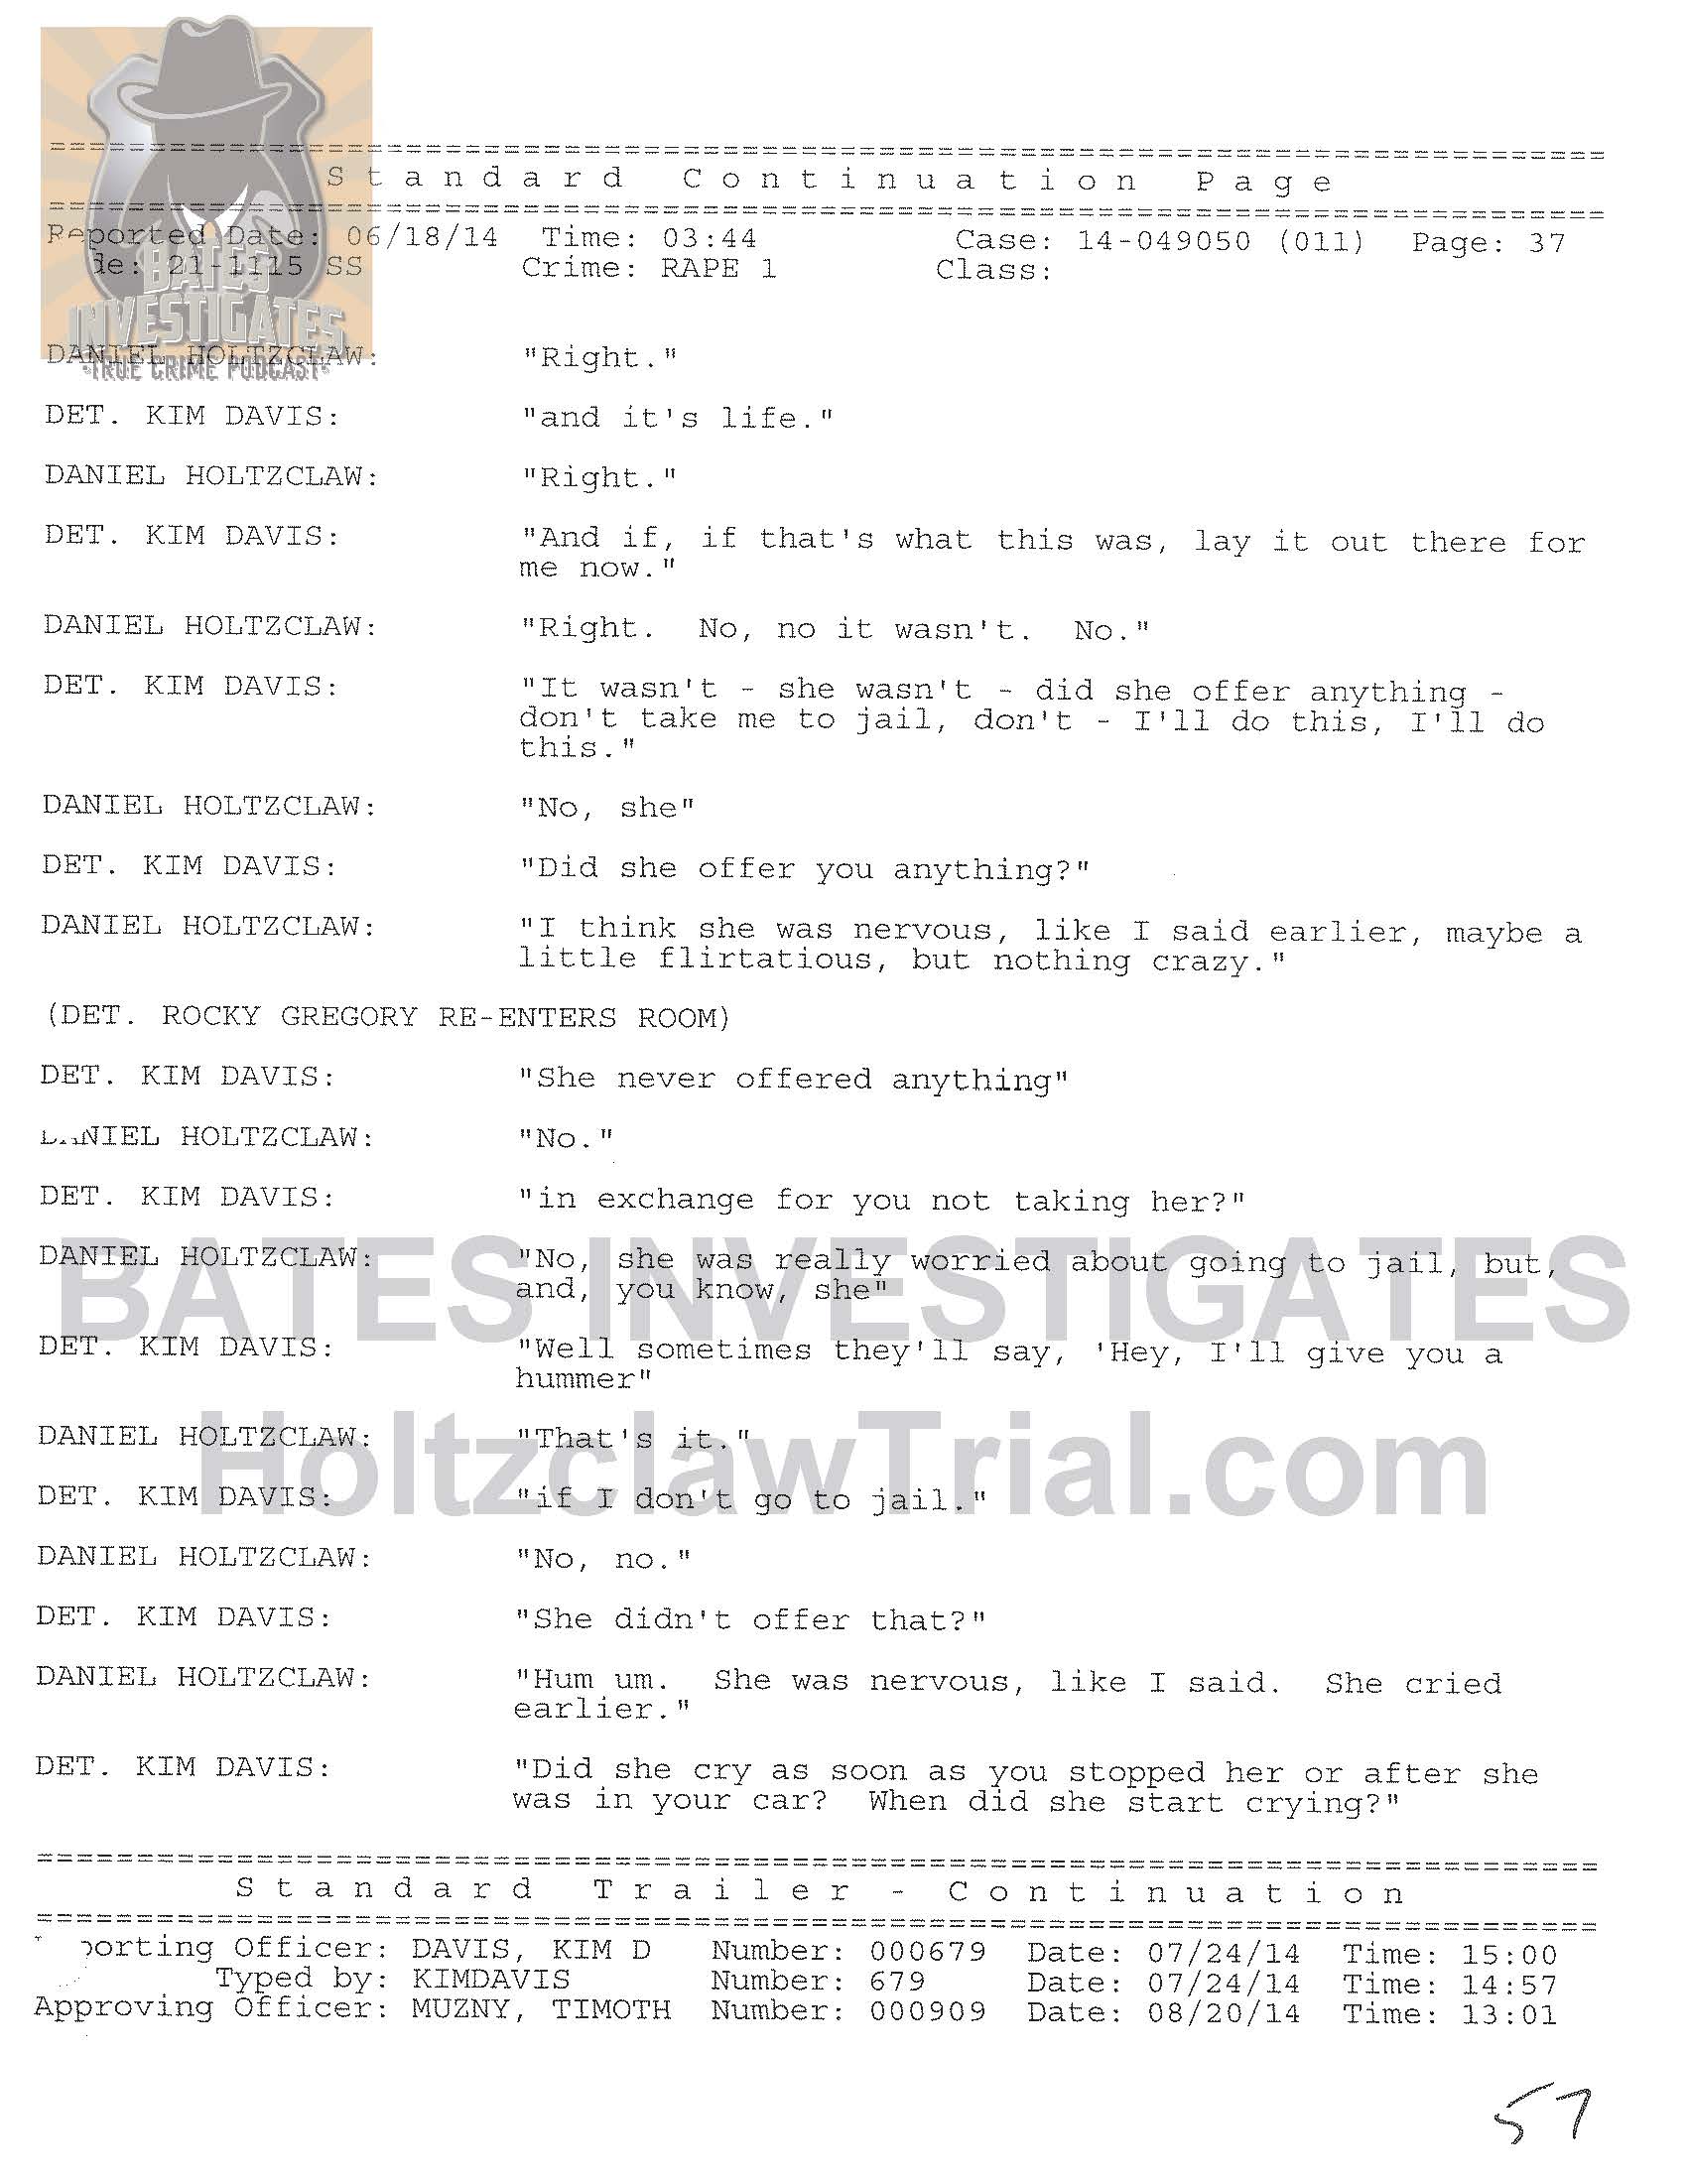 Holtzclaw Interrogation Transcript - Ep02 Redacted_Page_37.jpg